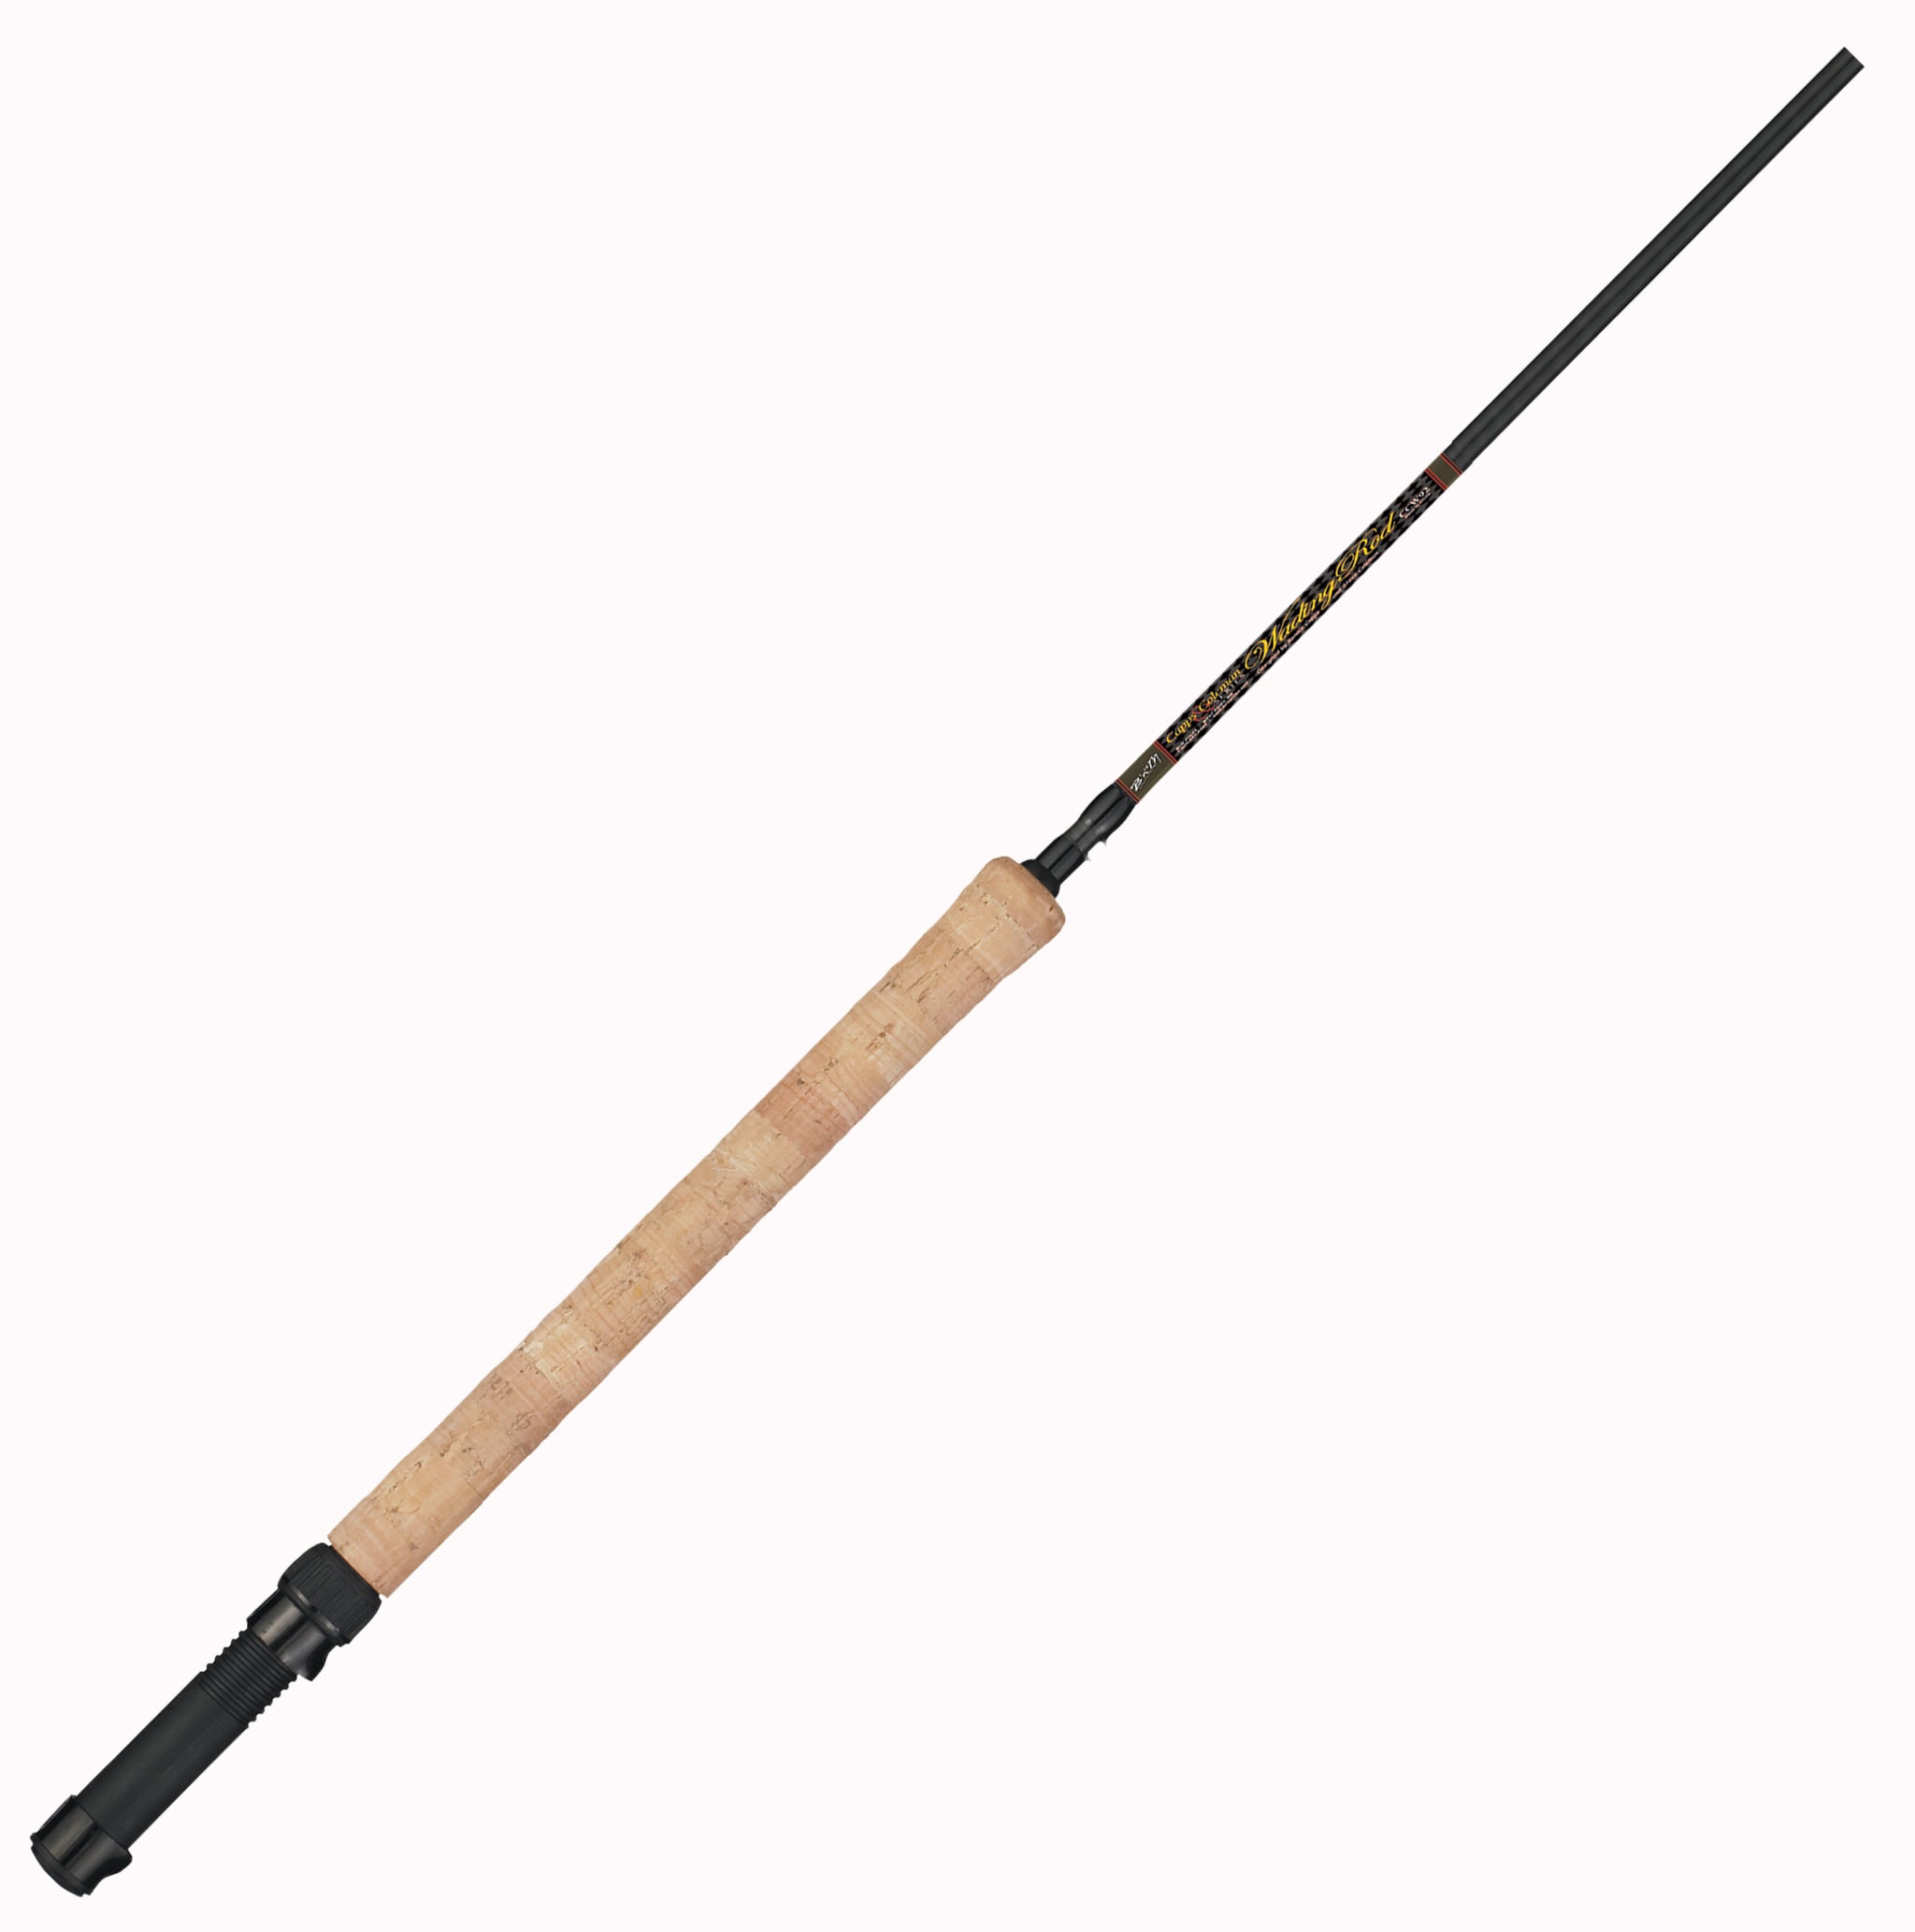 Capps & Coleman All-Purpose and Wading Rod - B'n'M Pole Company